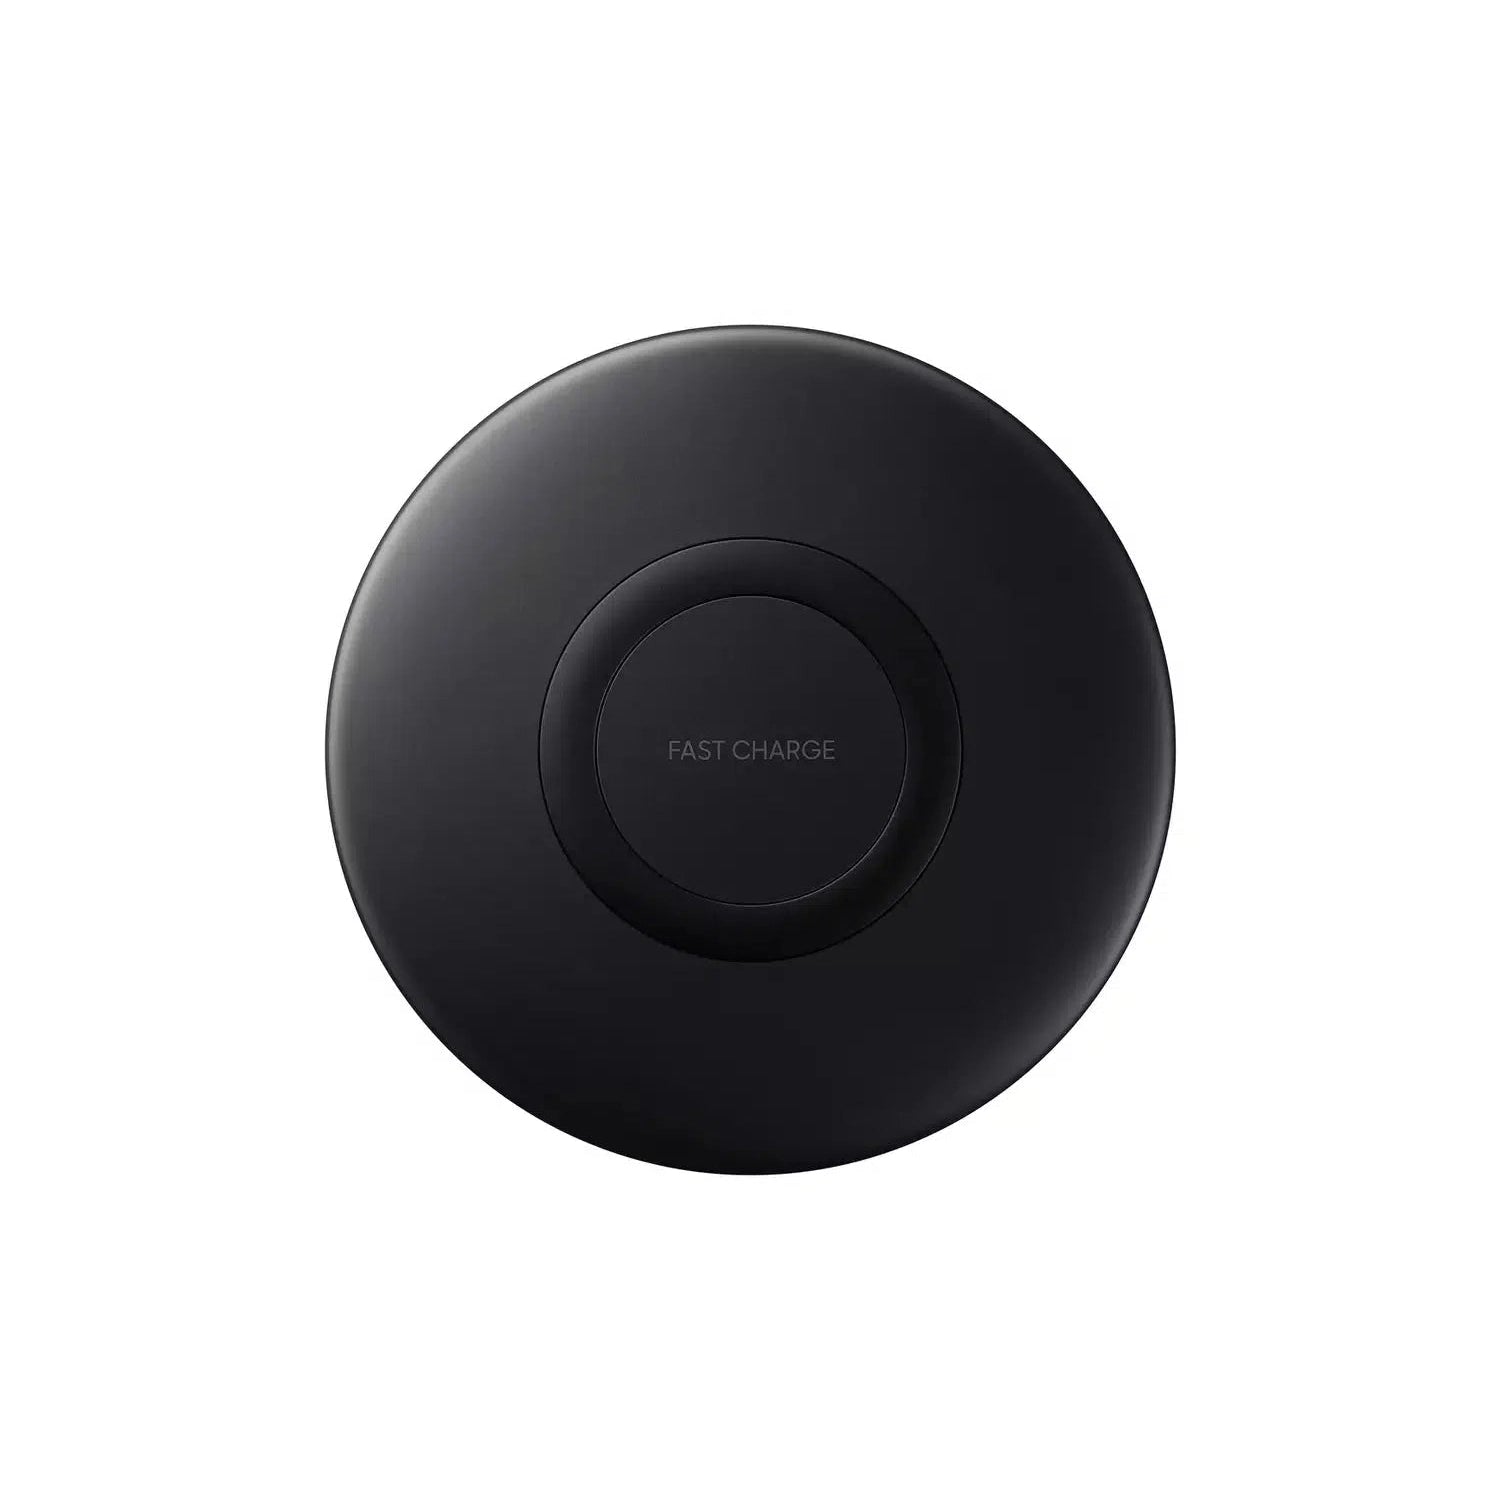 Samsung Qi Enabled 15W Fast Charge Wireless Charging Pad